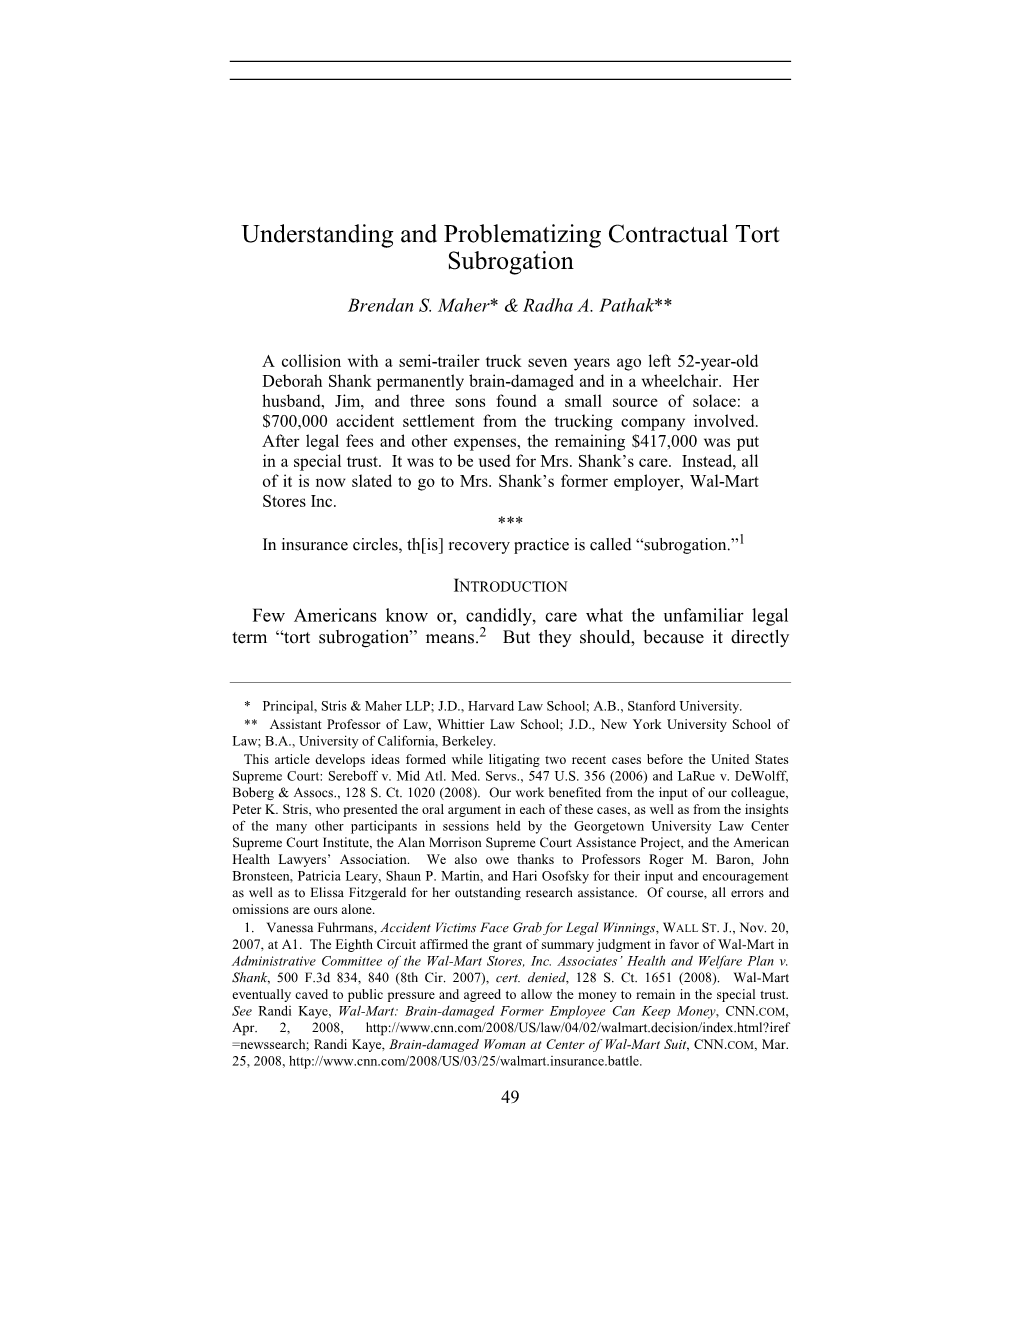 Understanding and Problematizing Contractual Tort Subrogation